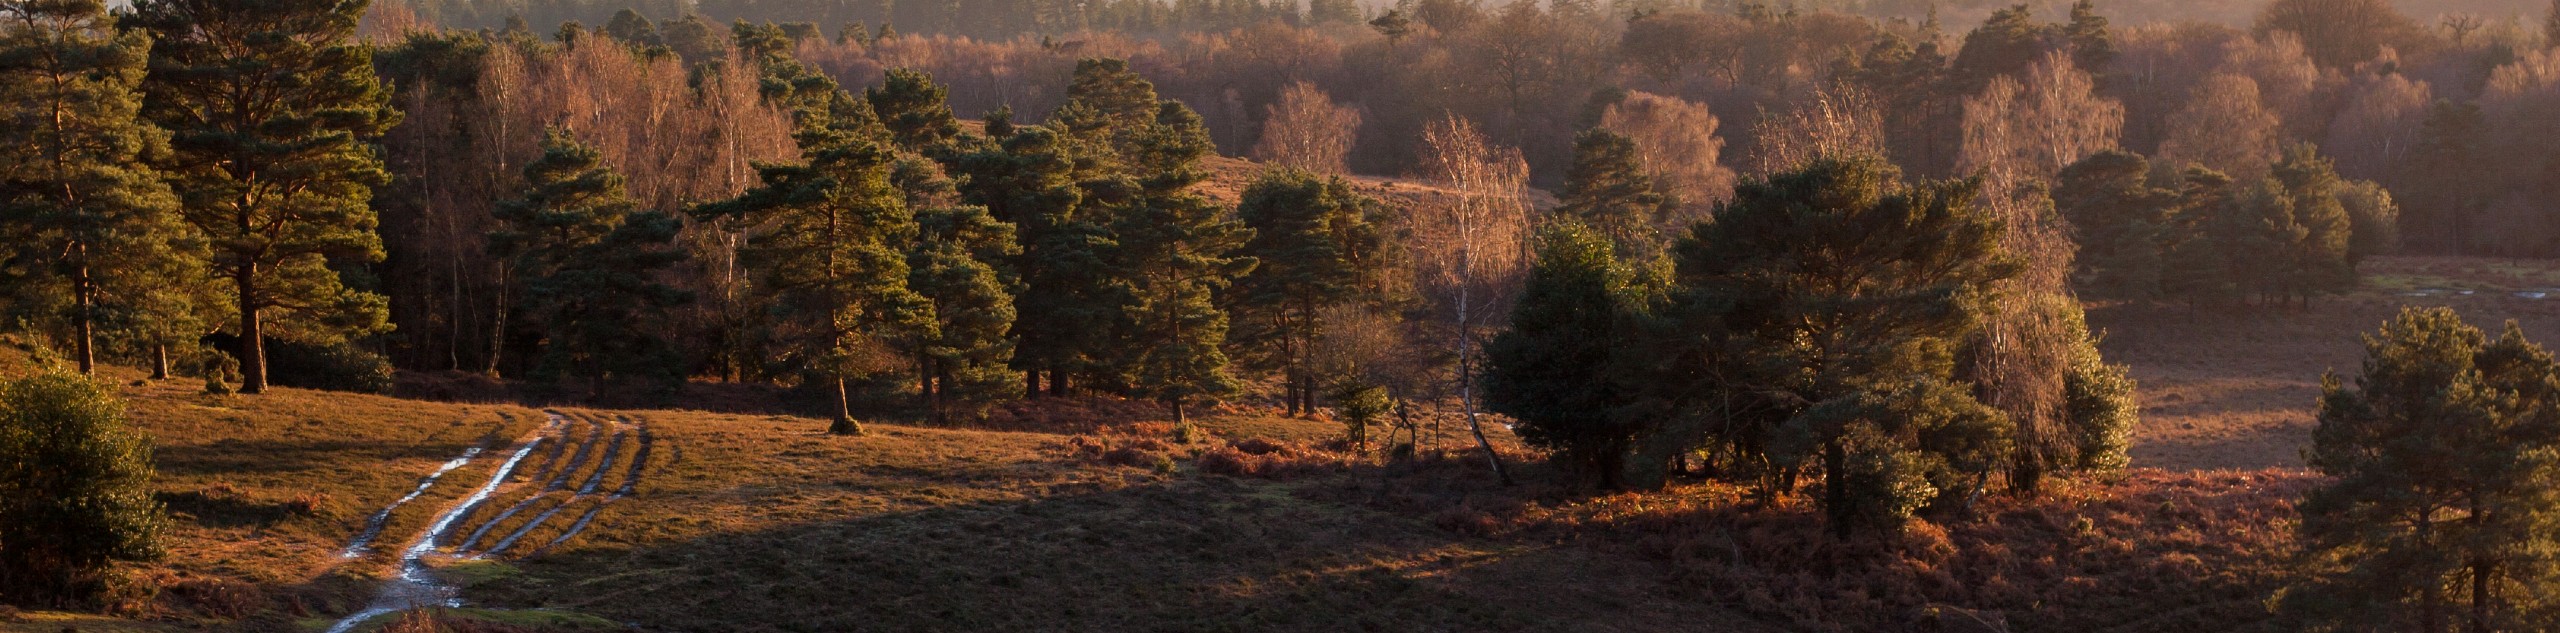 Acres Down New Forest Walk